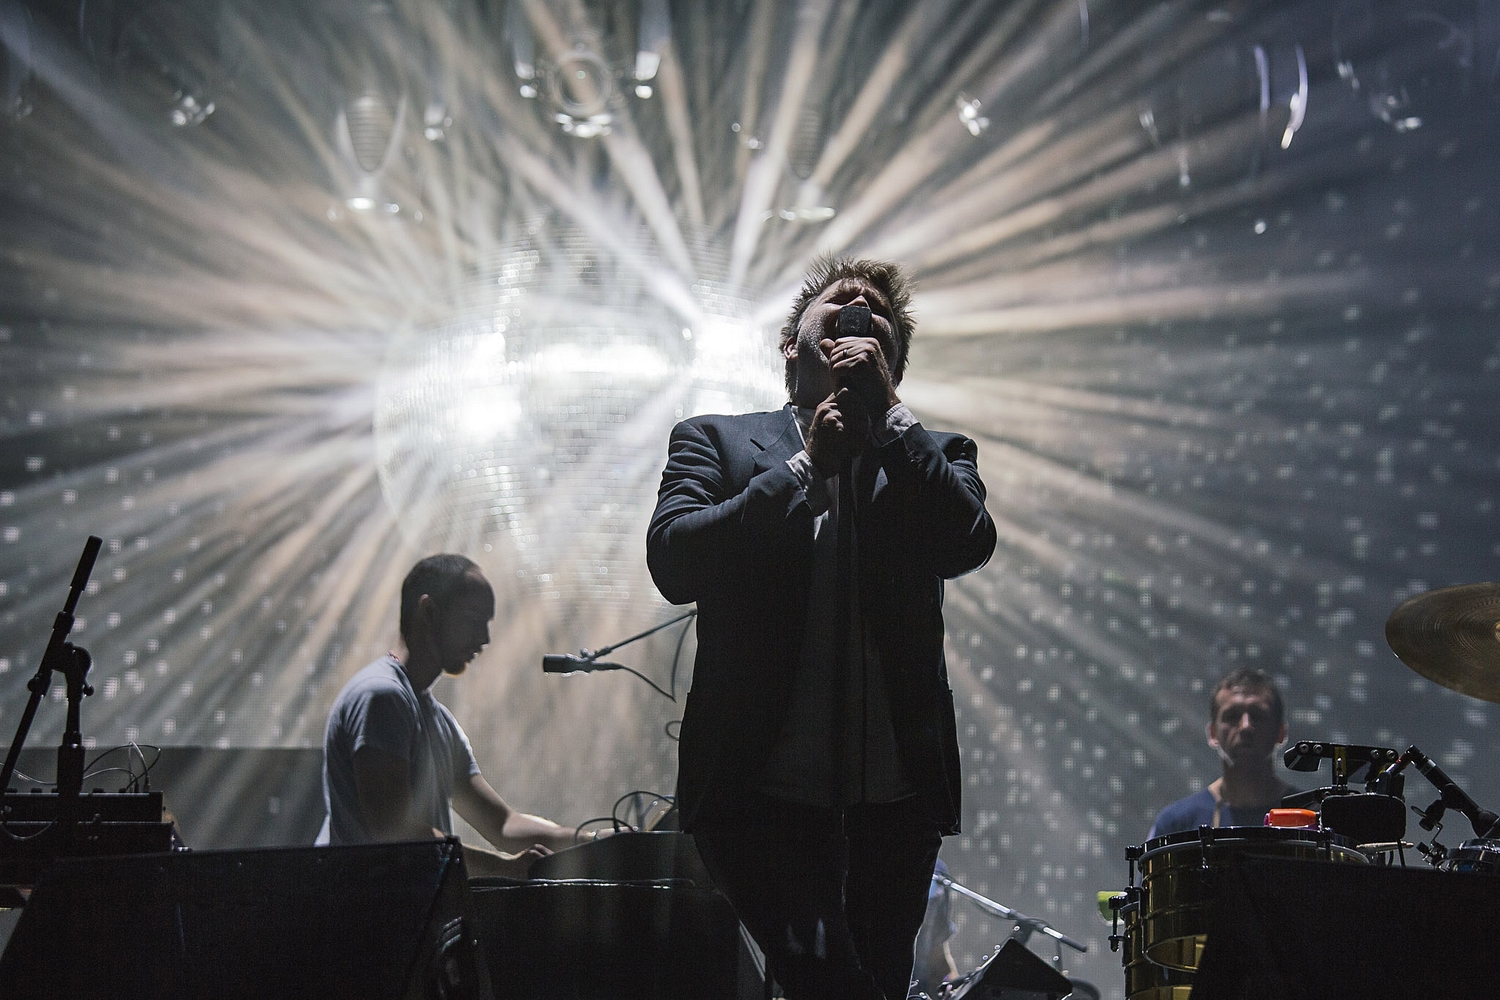 LCD Soundsystem announce first show of 2017